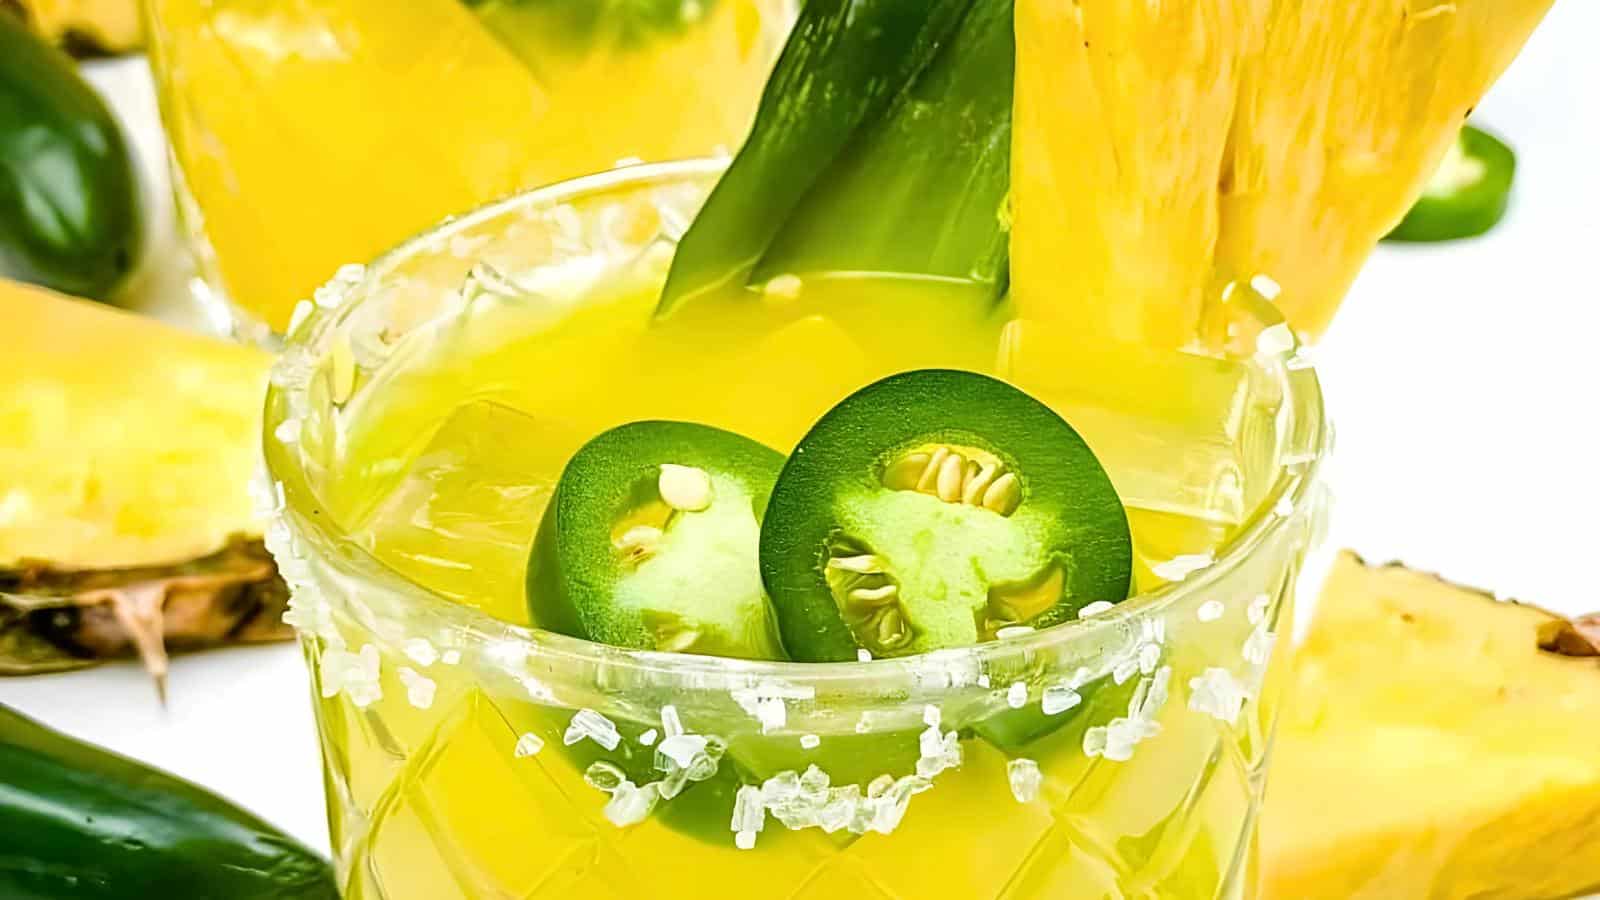 <p>Spice up your summer with a Spicy Pineapple Mezcal Margarita. The smoky mezcal pairs perfectly with sweet pineapple and a kick of jalapeño in this bold cocktail. It’s sure to impress.<br><strong>Get the Recipe: </strong><a href="https://olivetavern.com/spicy-pineapple-mezcal-margarita/?utm_source=msn&utm_medium=page&utm_campaign=msn" rel="noopener">Spicy Pineapple Mezcal Margarita</a></p>